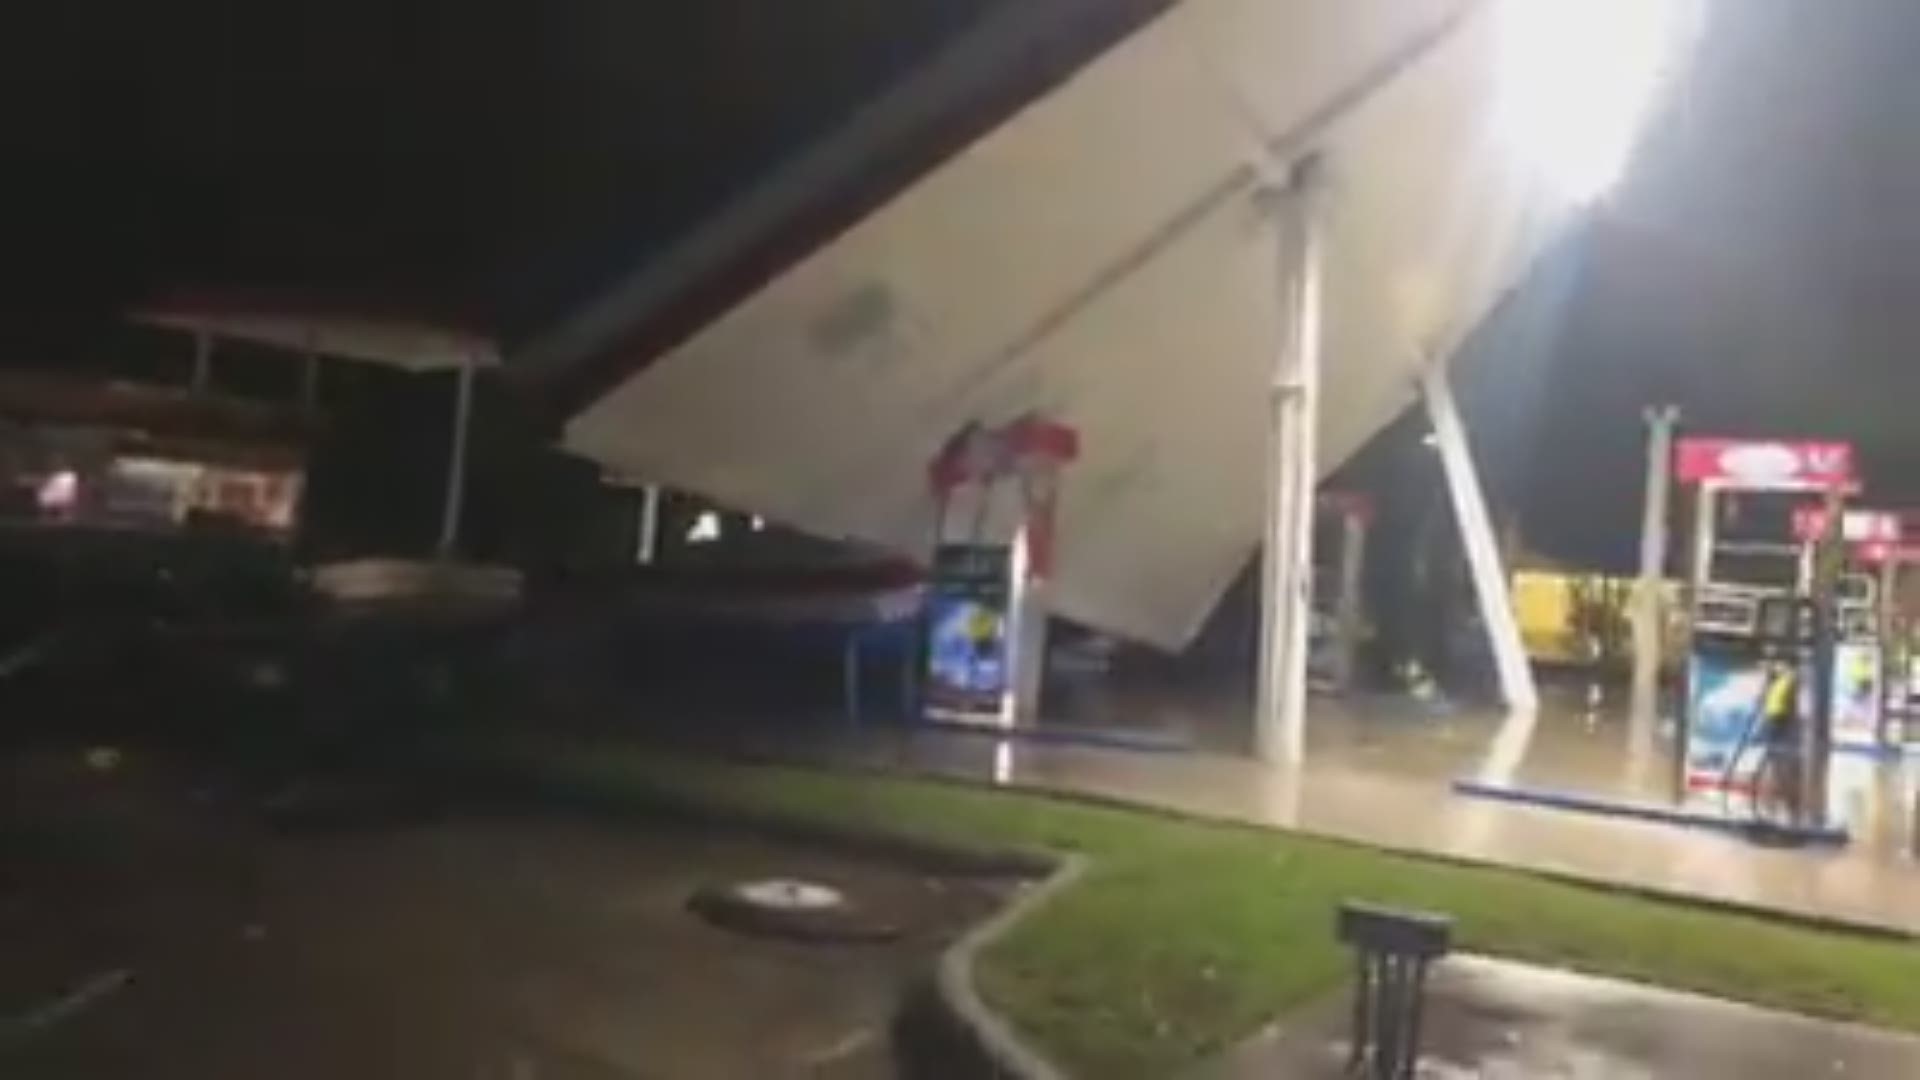 Video taken by Mark Cogdell shows a gas station on Market St. in Wilmington, North Carolina collapsing in Hurricane Florence's winds.